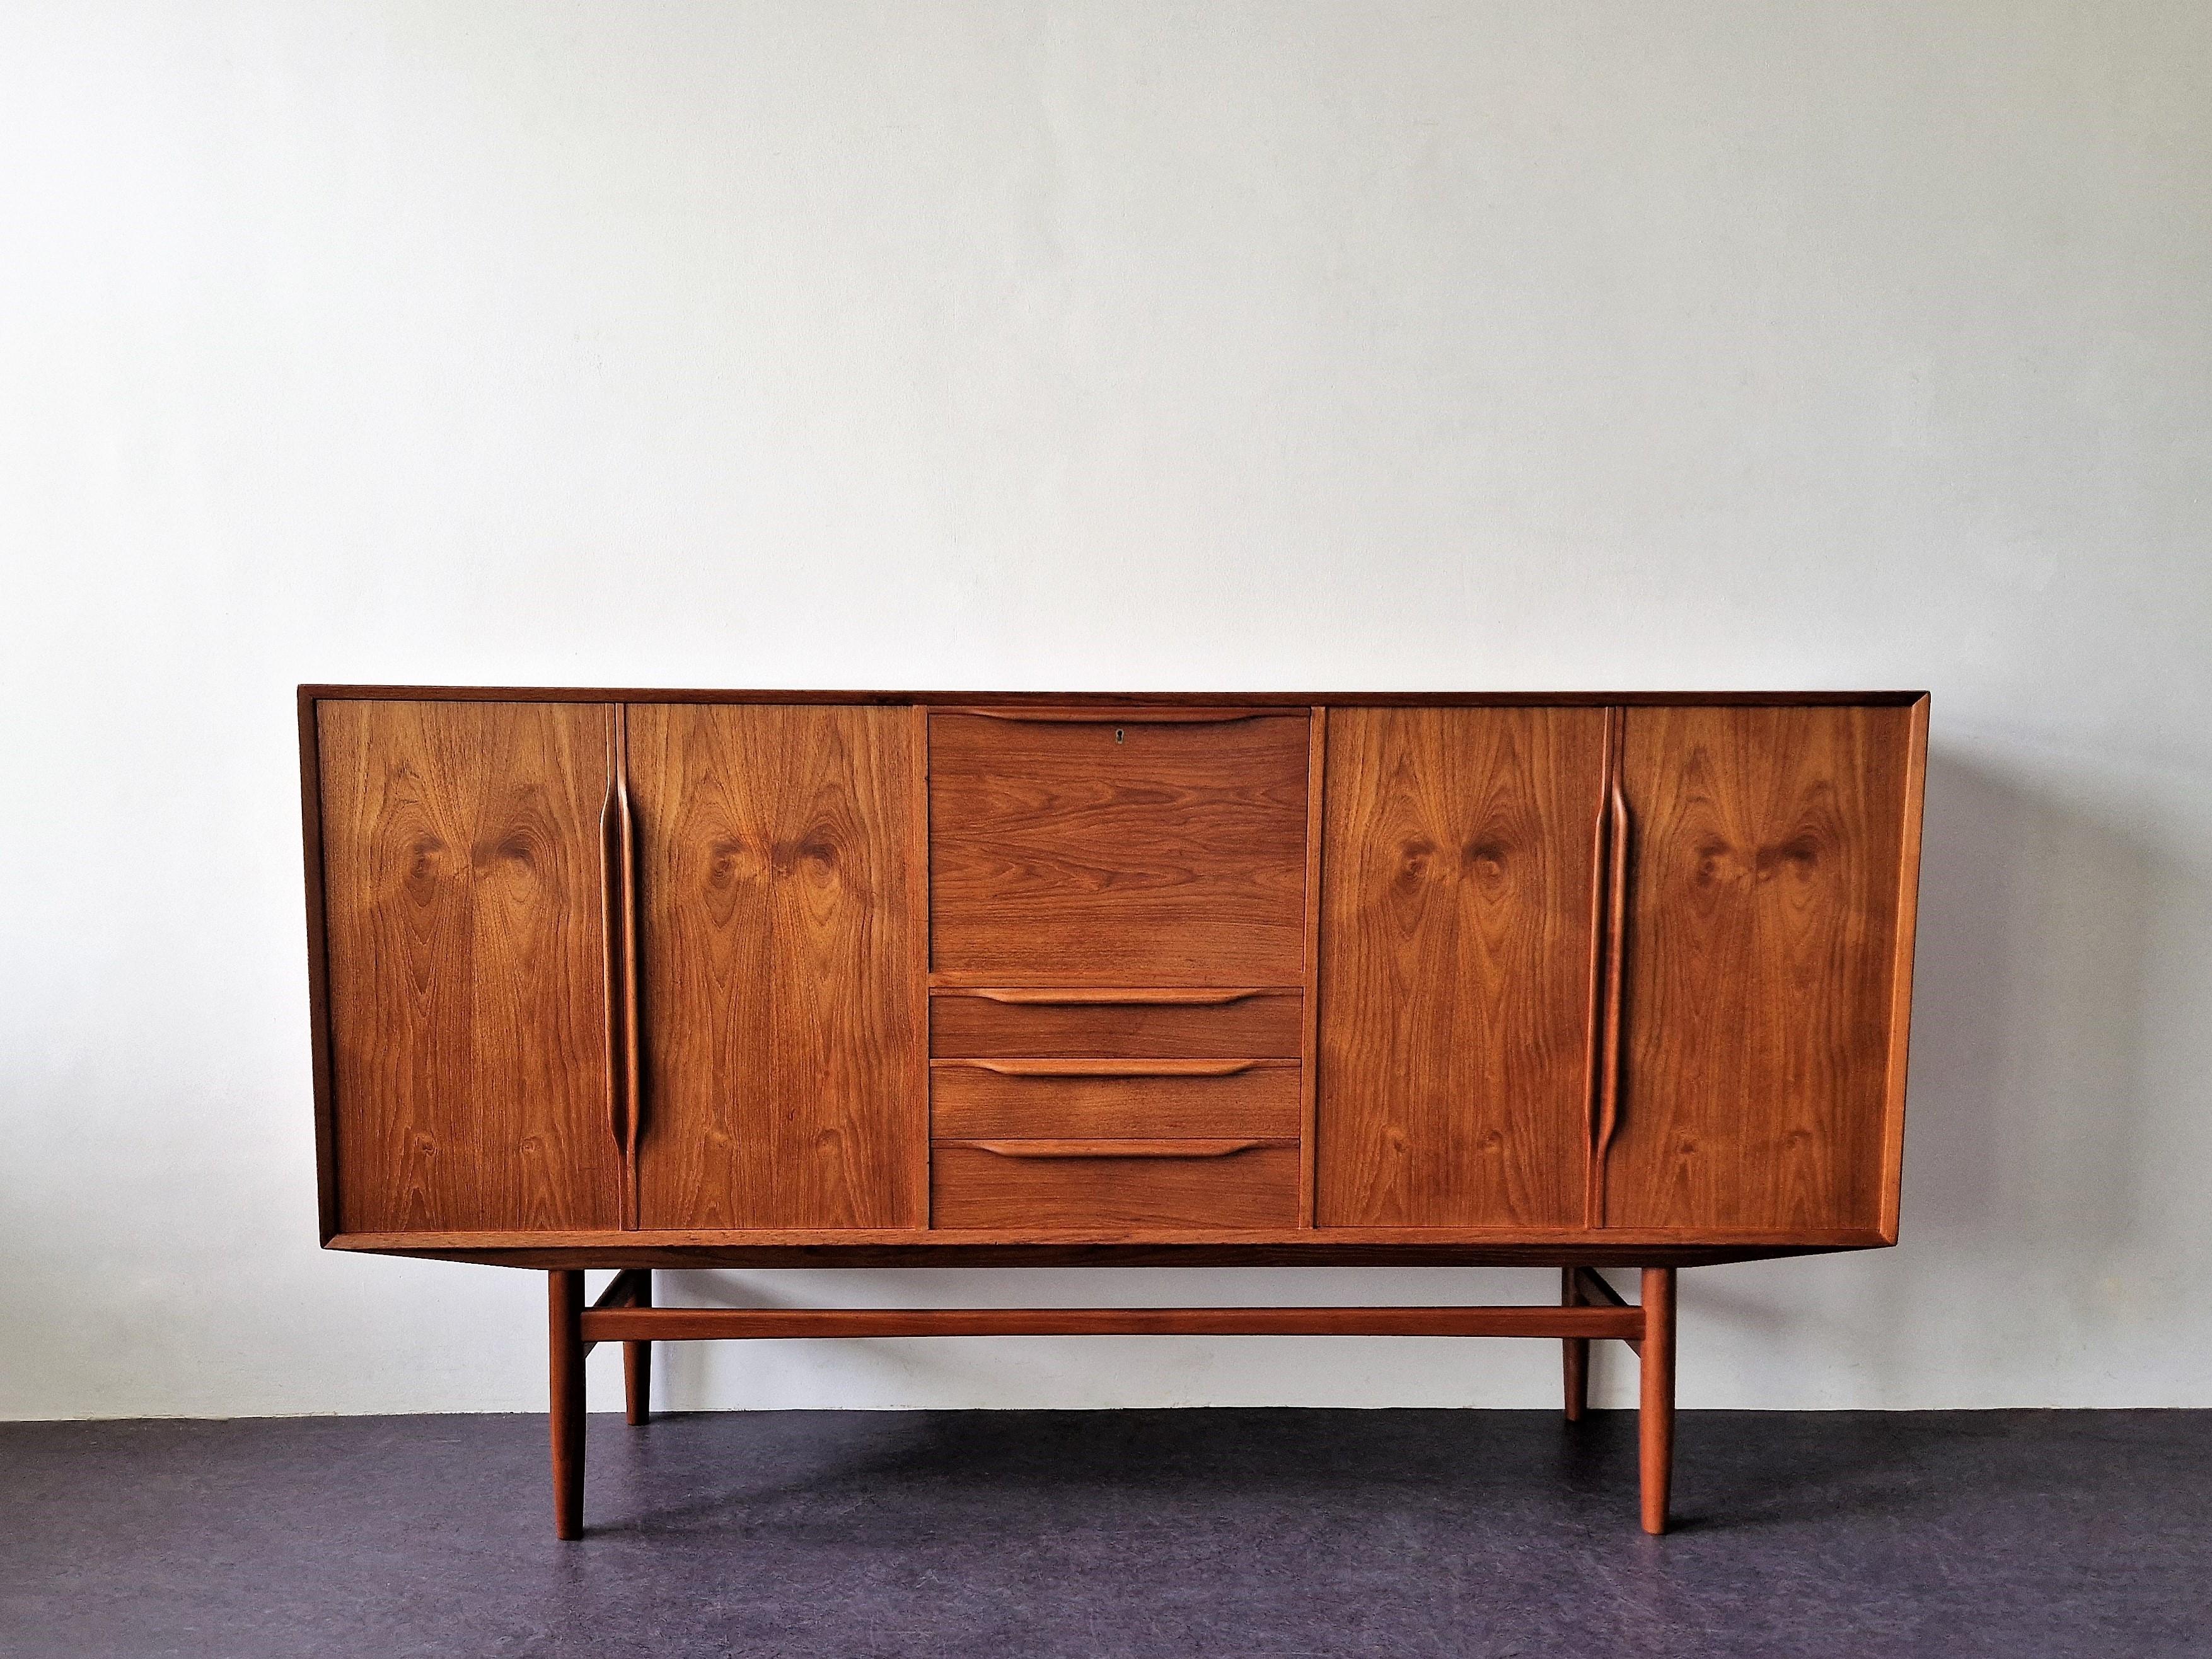 This beautiful vintage teak veneer highboard was imported from Denmark. It has 2 doors on both sides with 2  shelves each. In the middle a drop front mirrored cabinet (nice to set up as a bar), that has a round shaped black wooden removable shelf, a